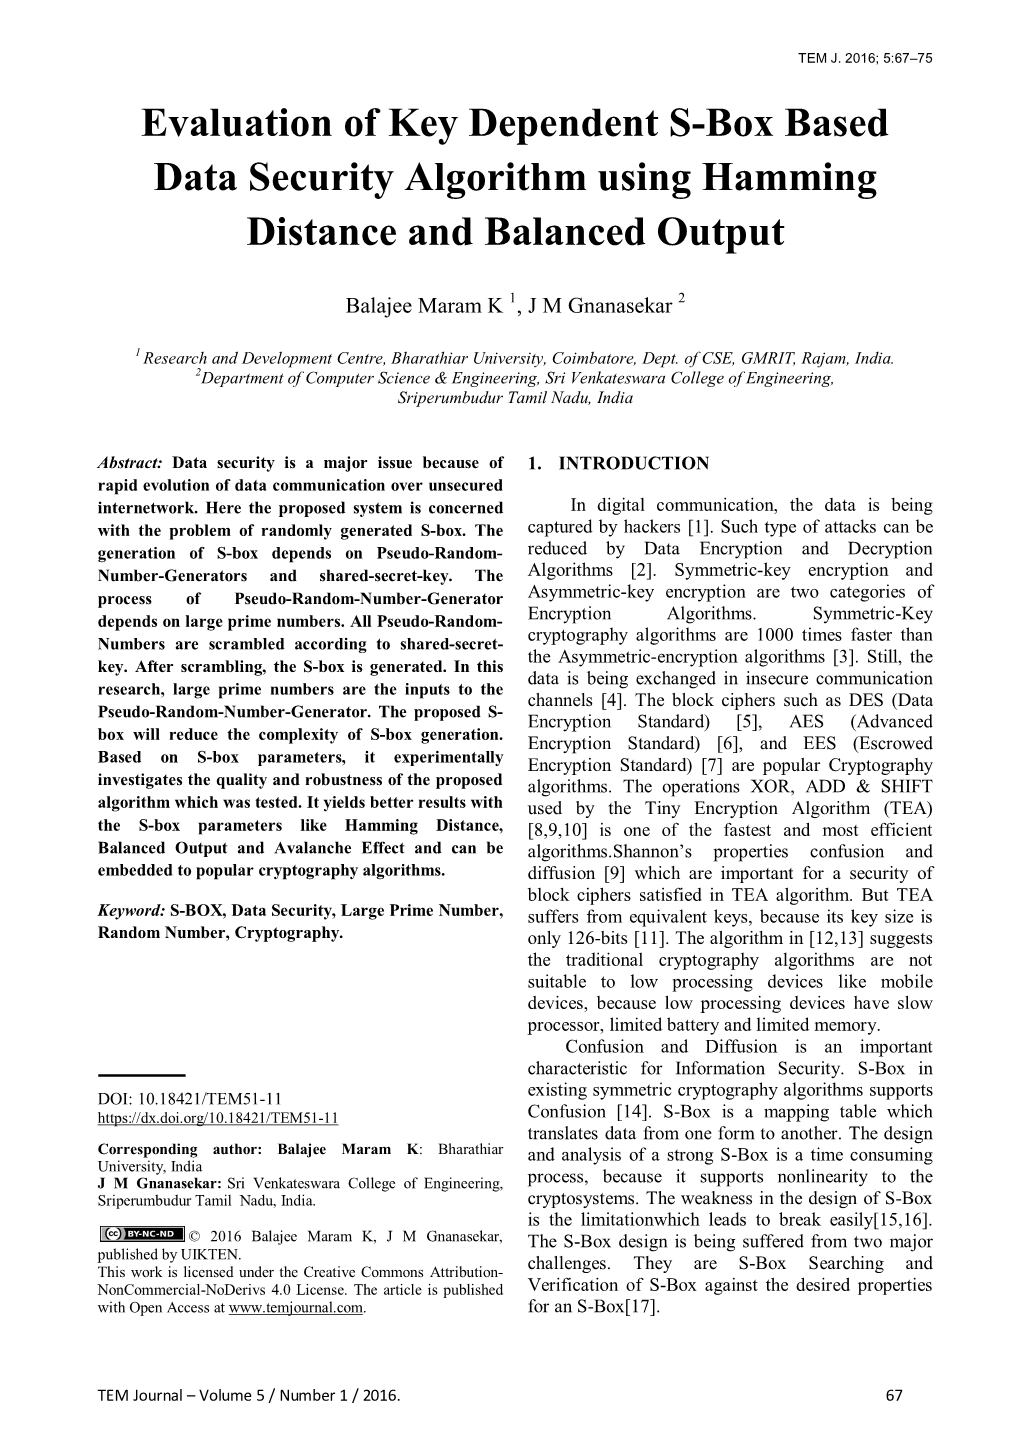 Evaluation of Key Dependent S-Box Based Data Security Algorithm Using Hamming Distance and Balanced Output